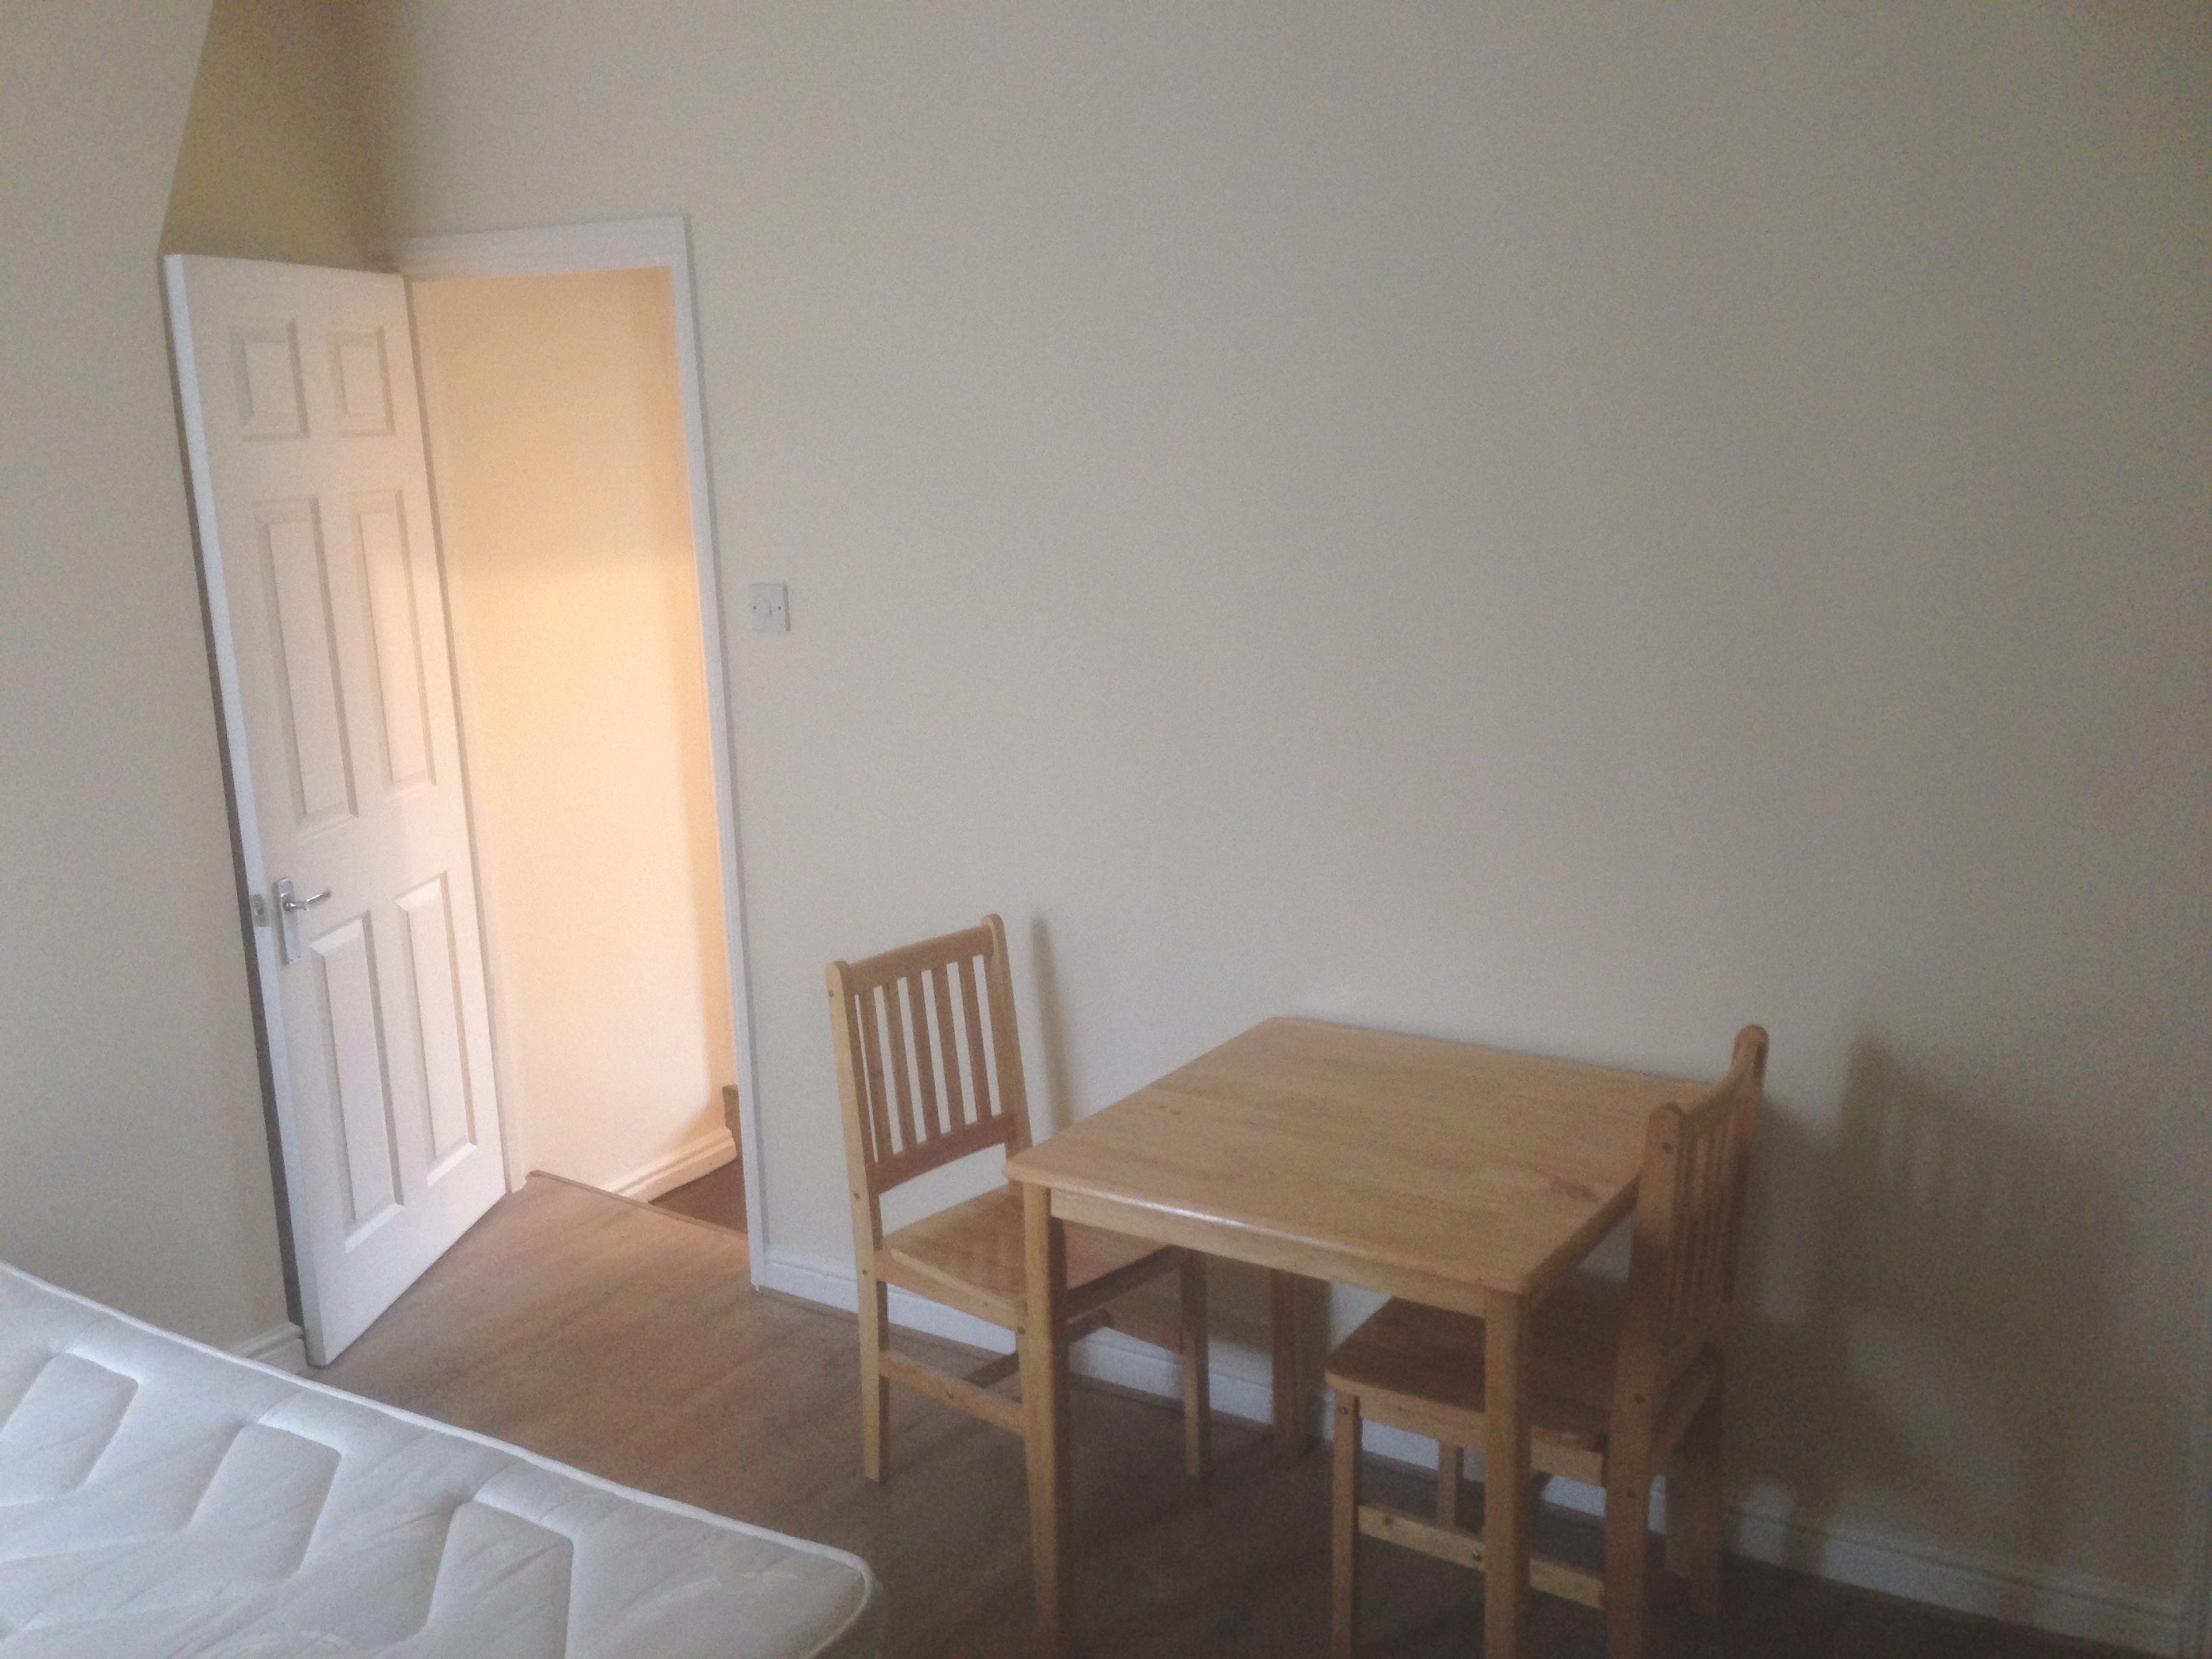 Well located one bedroom flat situated in Tottenham Hale.